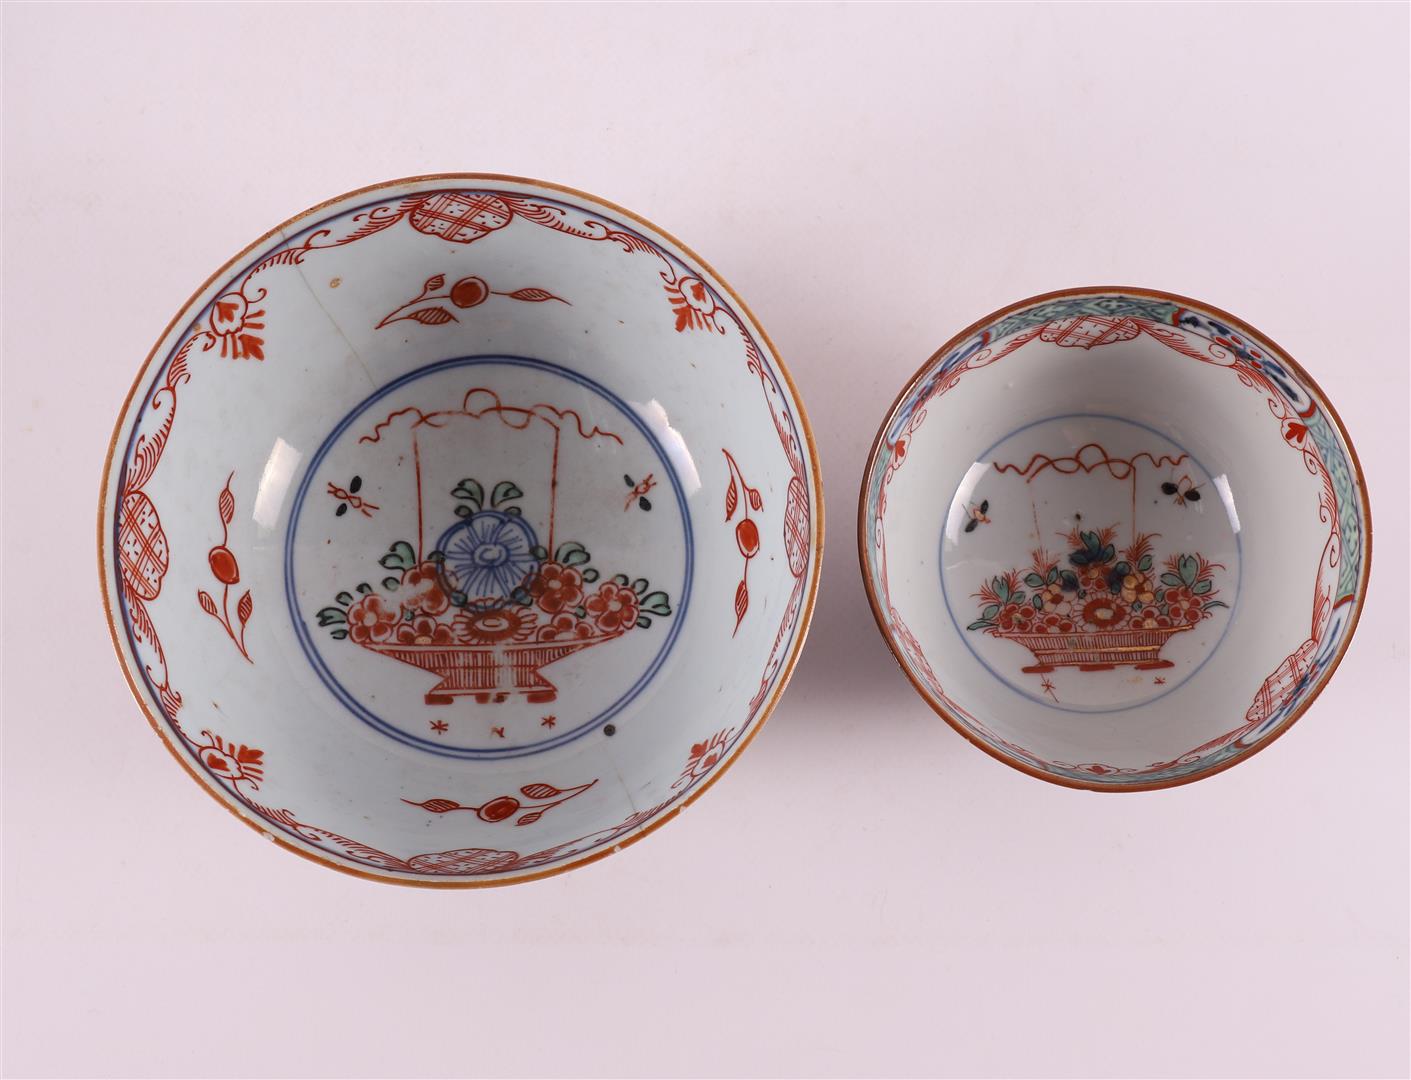 Five various porcelain Amsterdam variegated bowls, China, 18th century. - Image 6 of 17